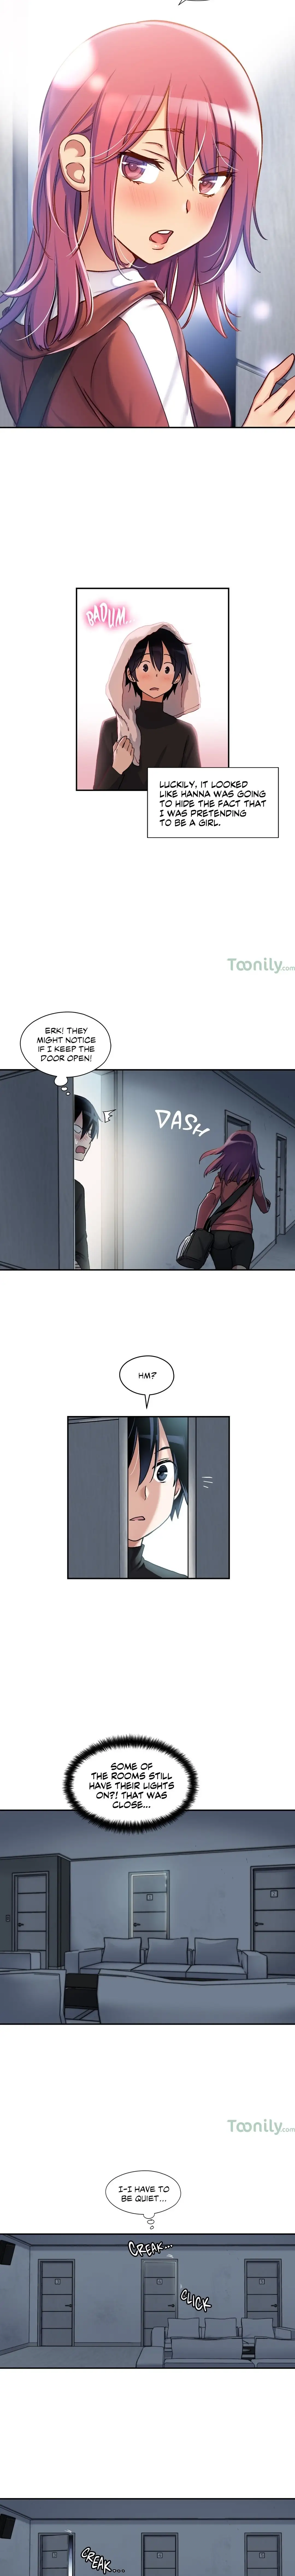 Under Observation: My First Loves and I - Chapter 6 Page 9